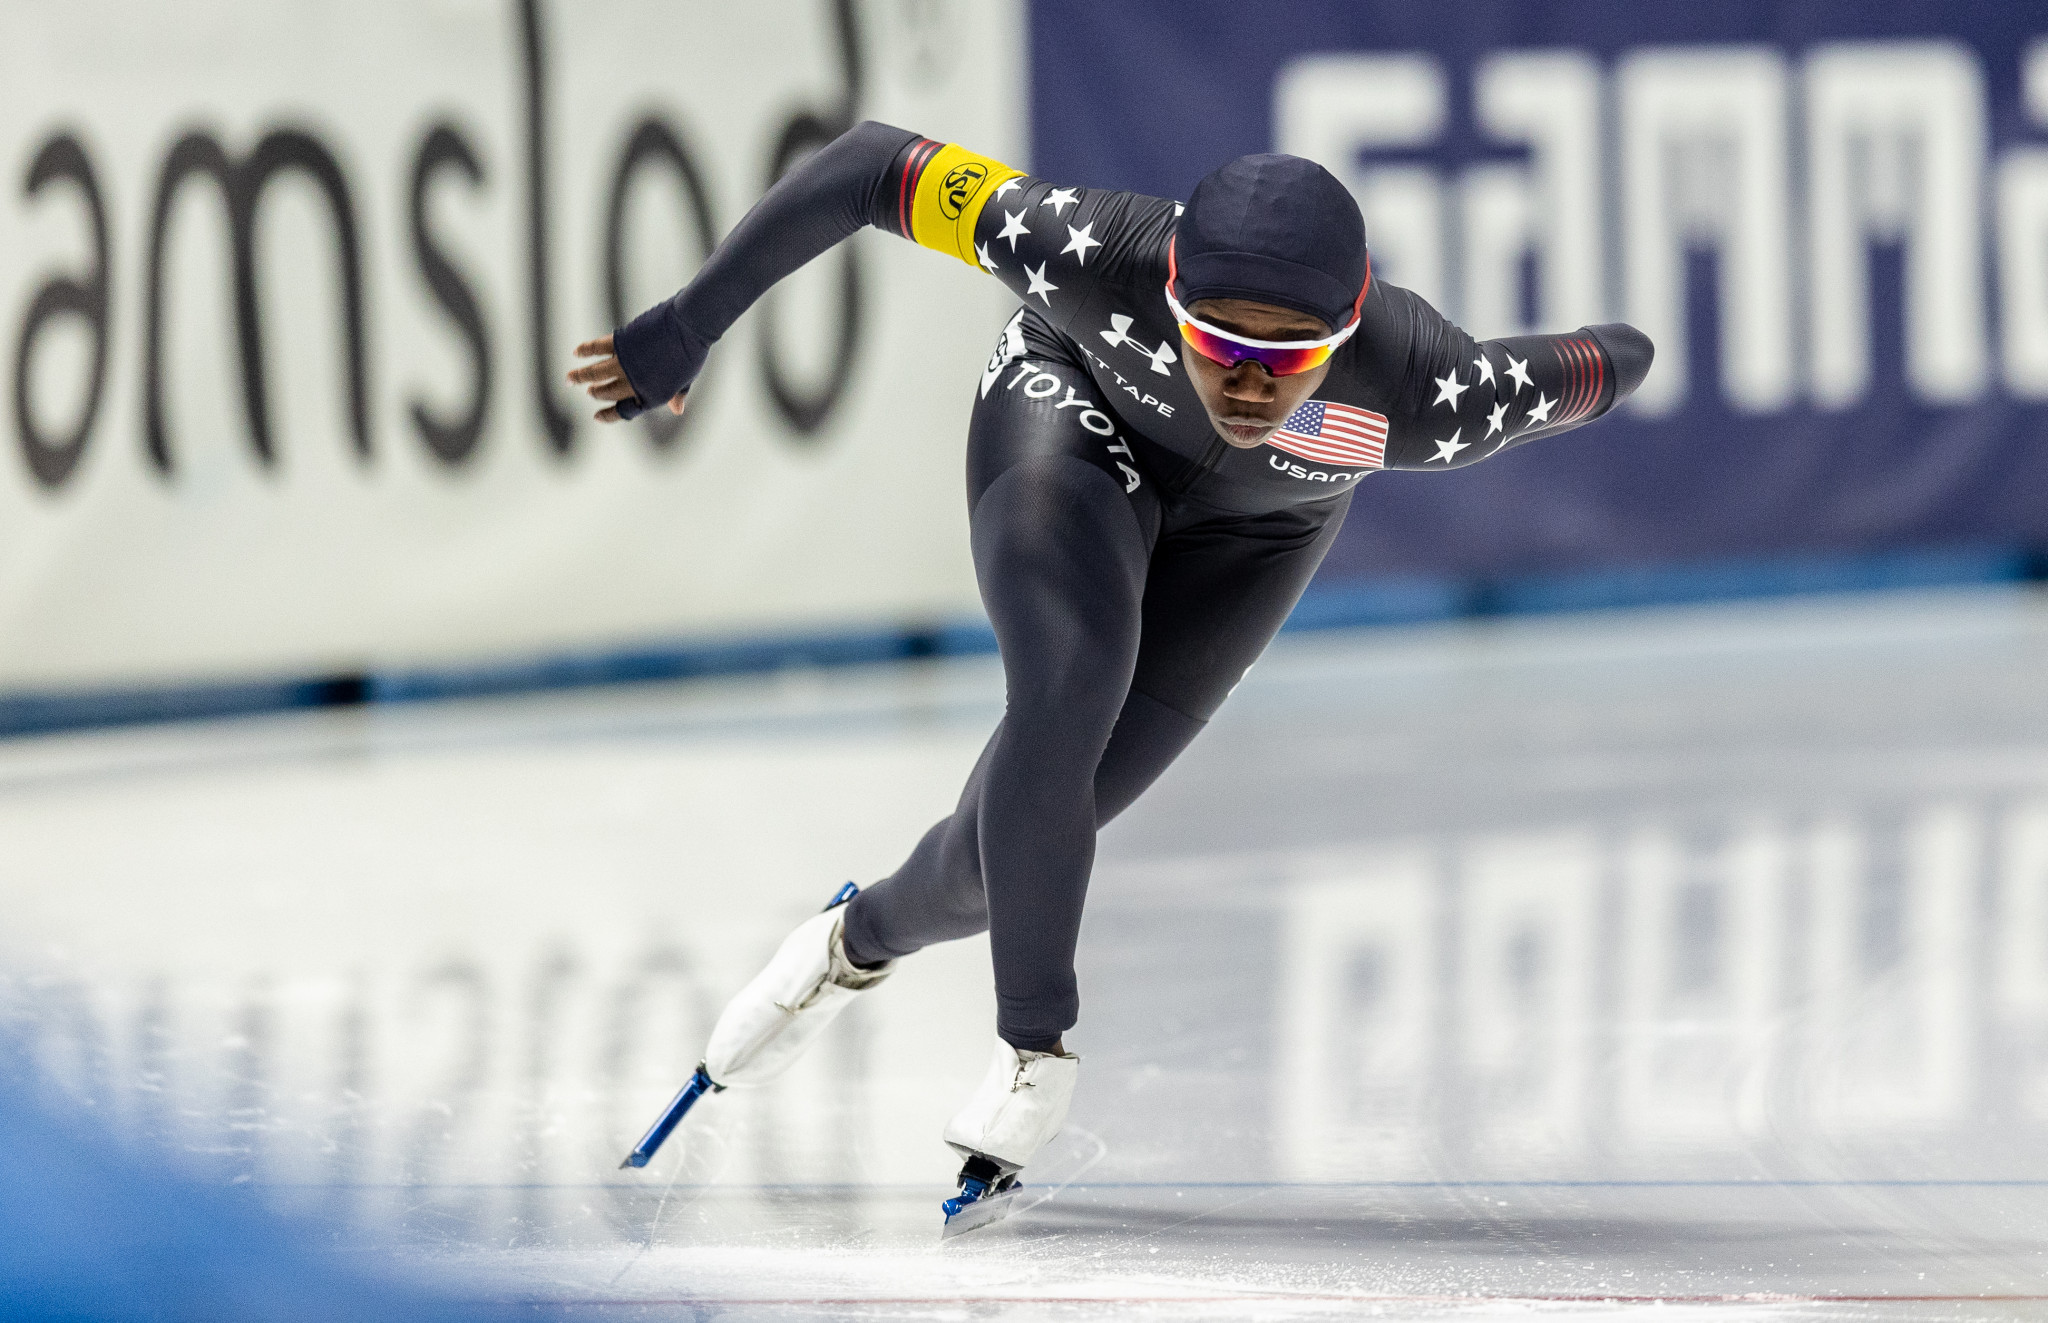 Jackson and Schouten seek further success at ISU Speed Skating World Cup in Norway